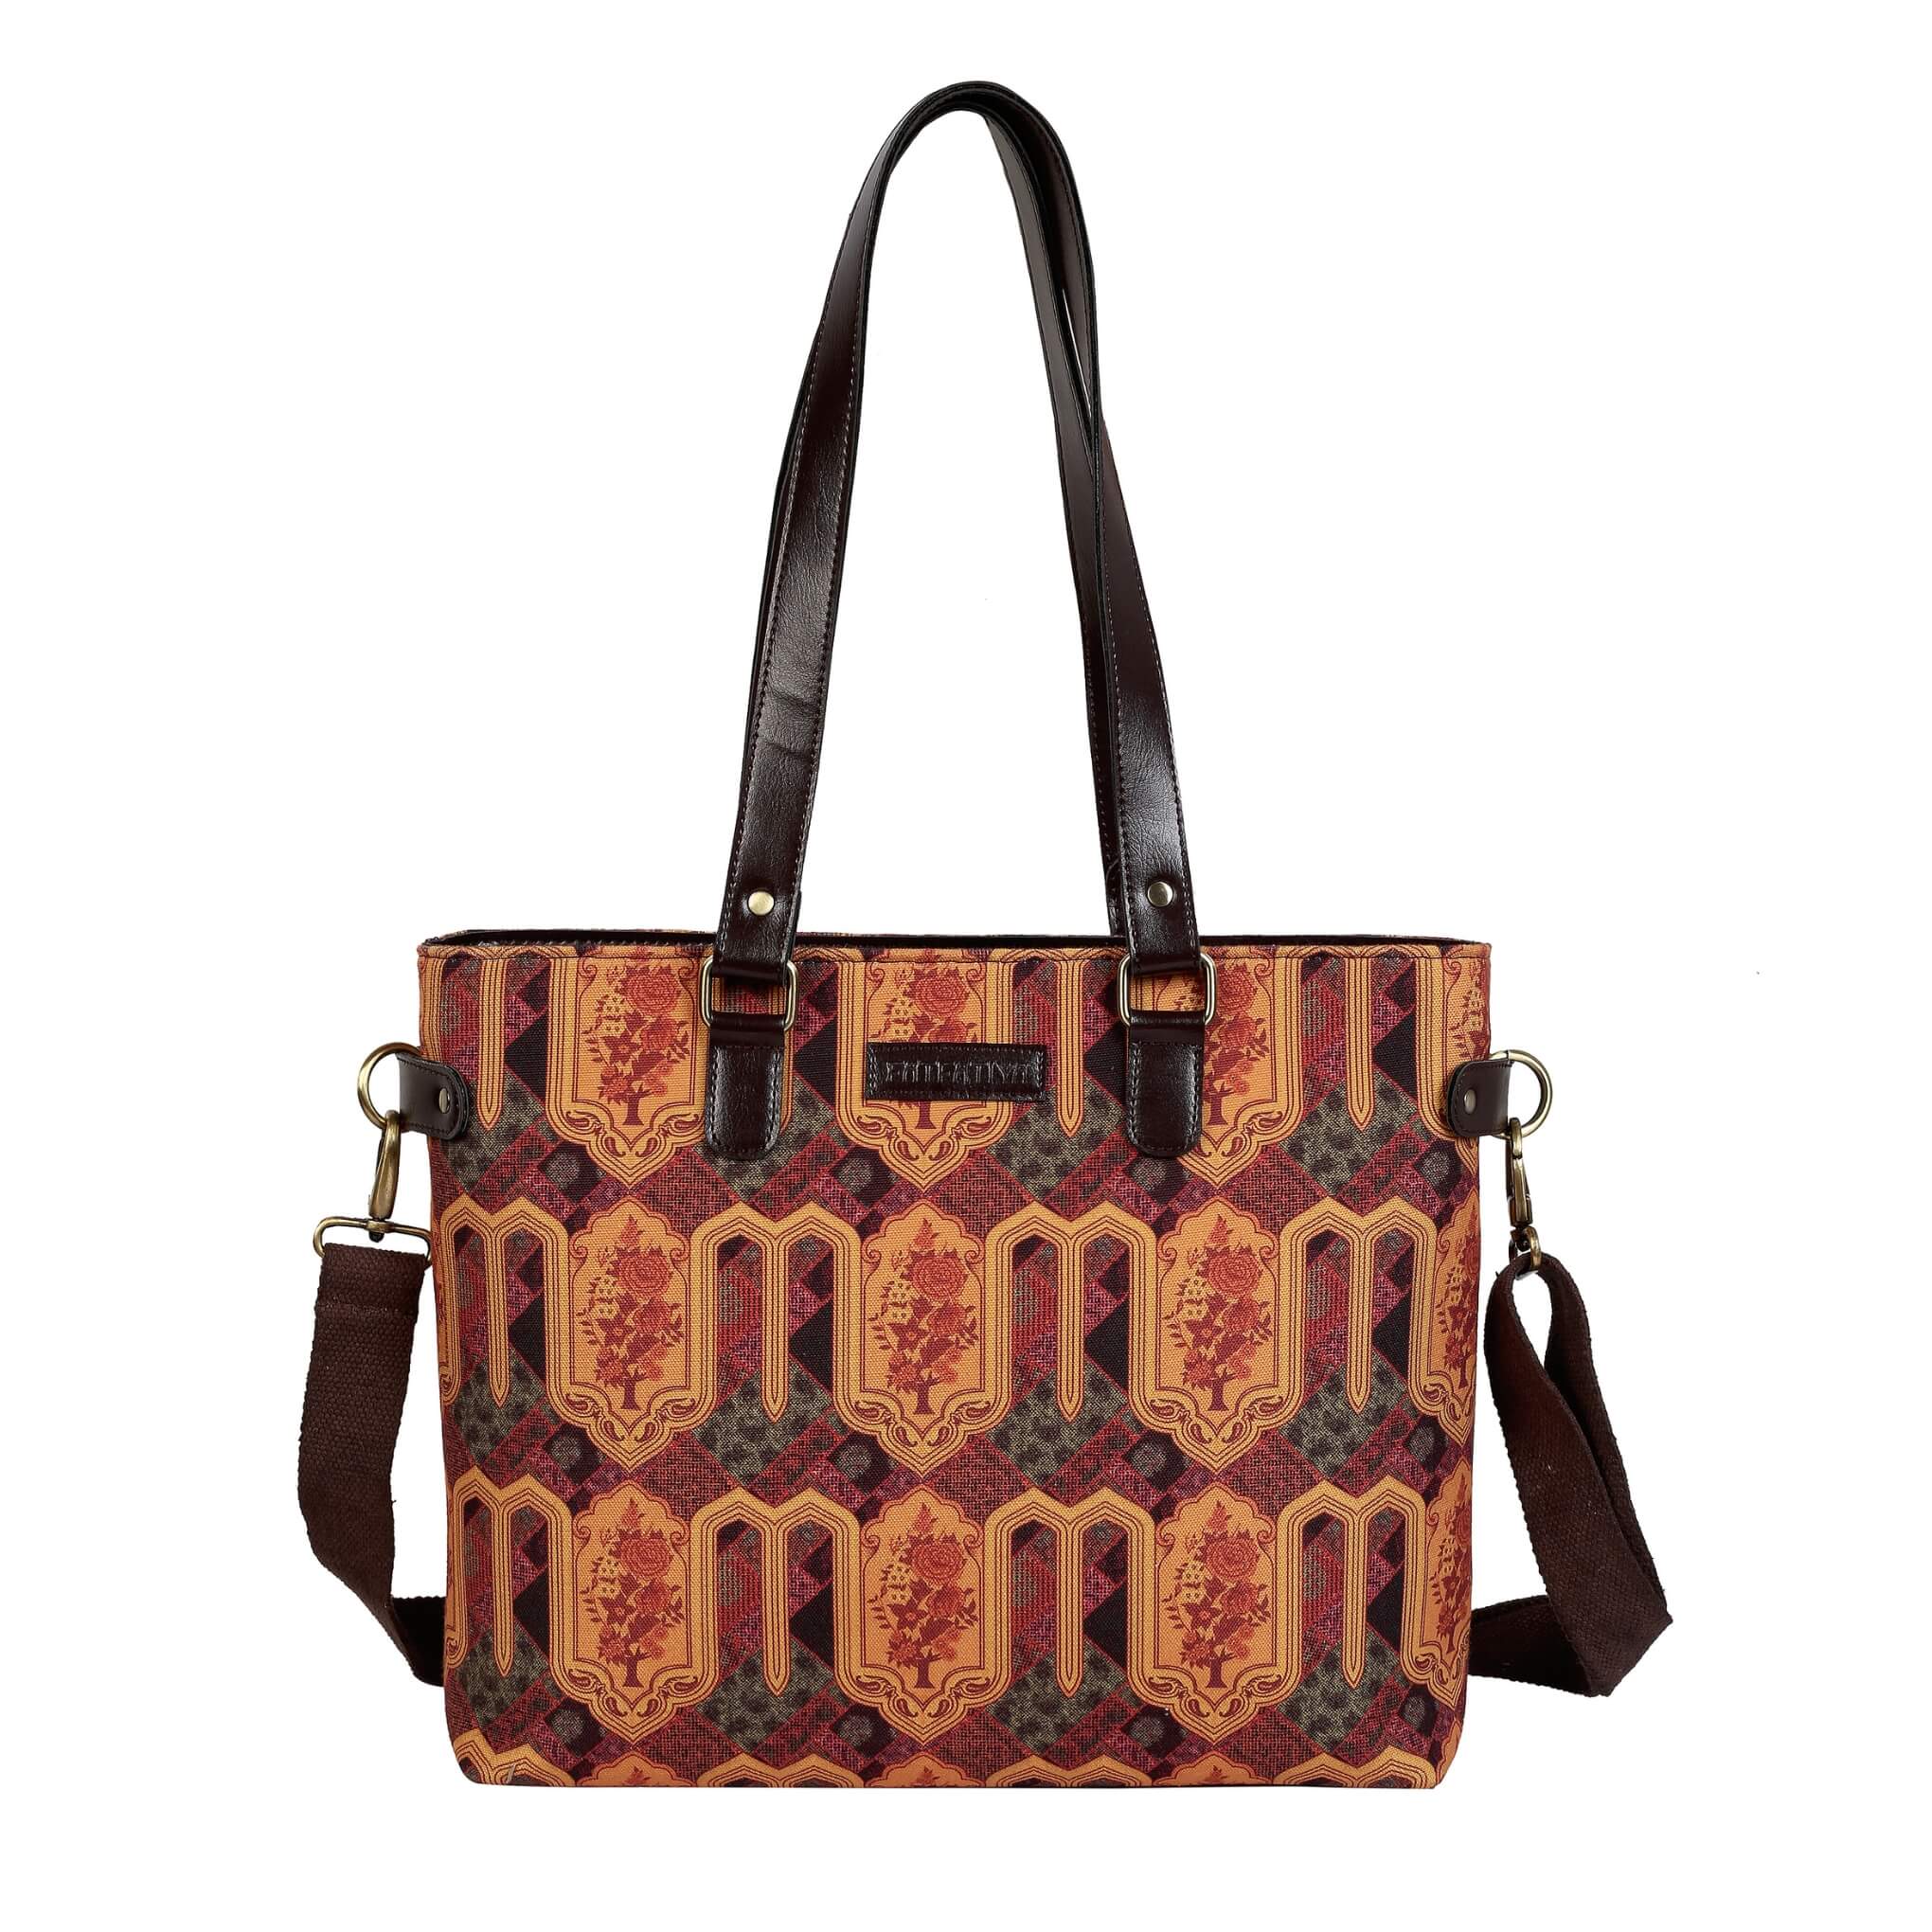 Flowers Design Tote Bag with Laptop Compartment